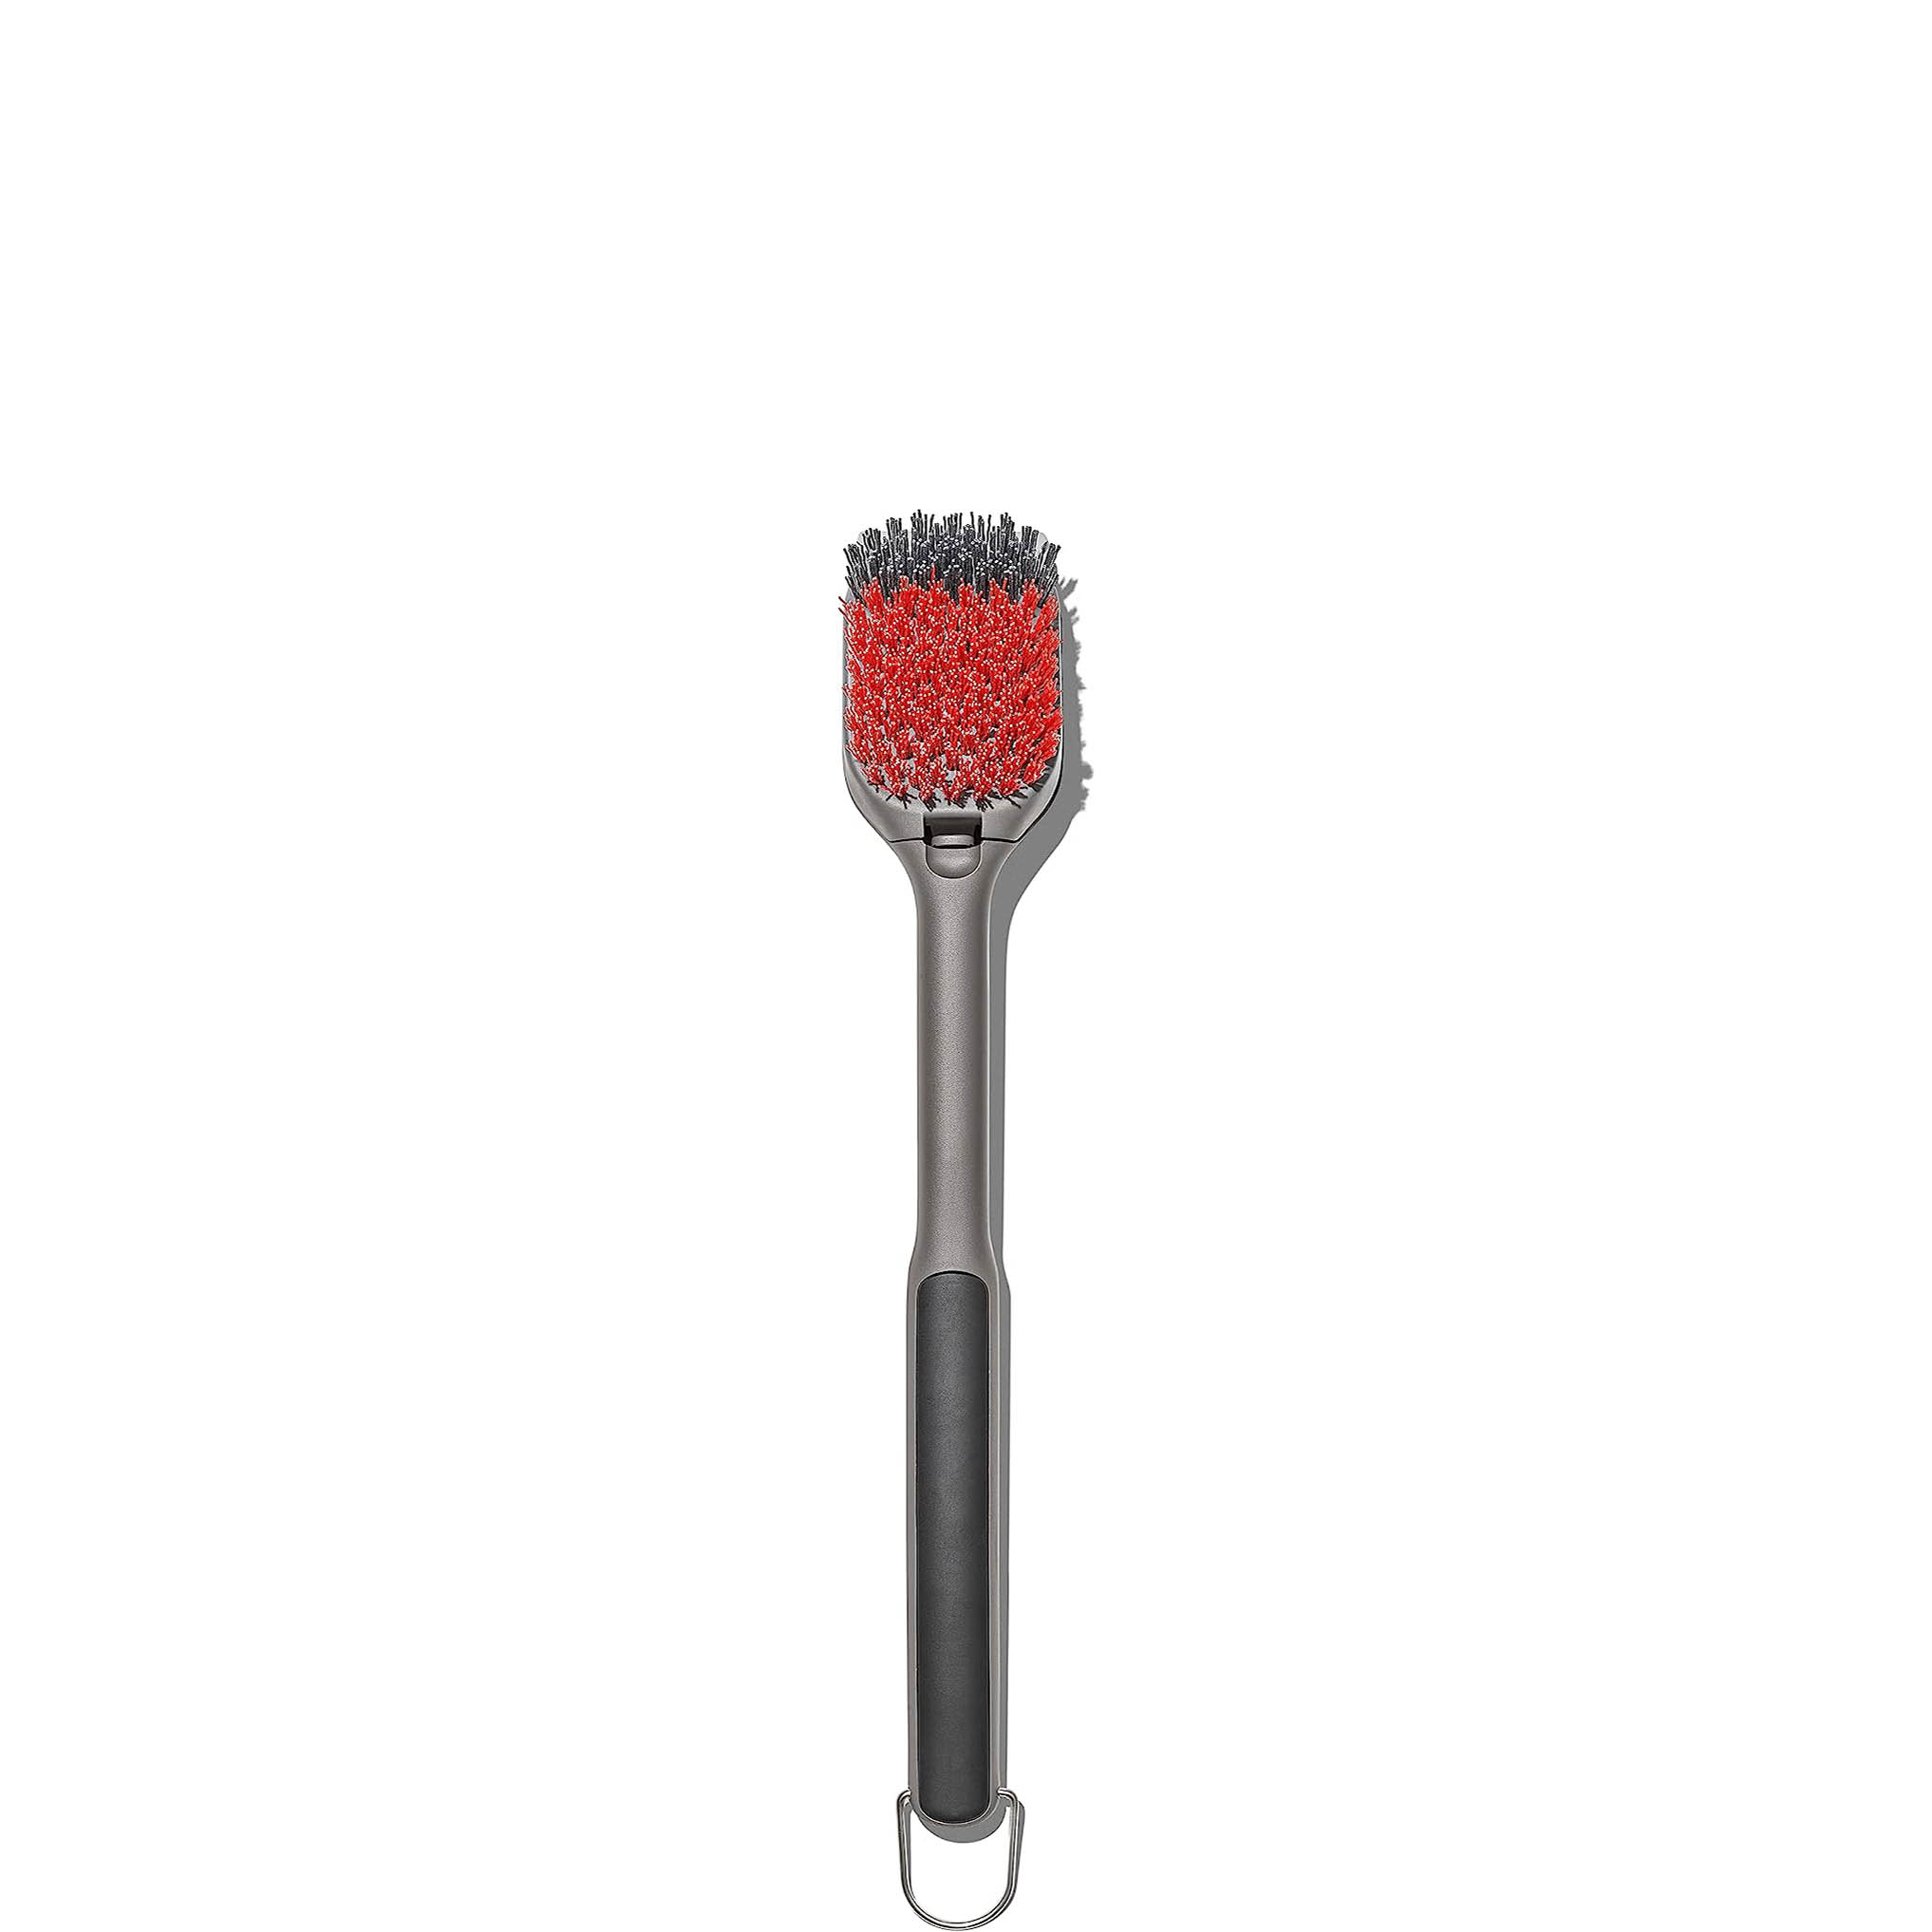 OXO Good Grips Grilling Cold Clean Grill Brush